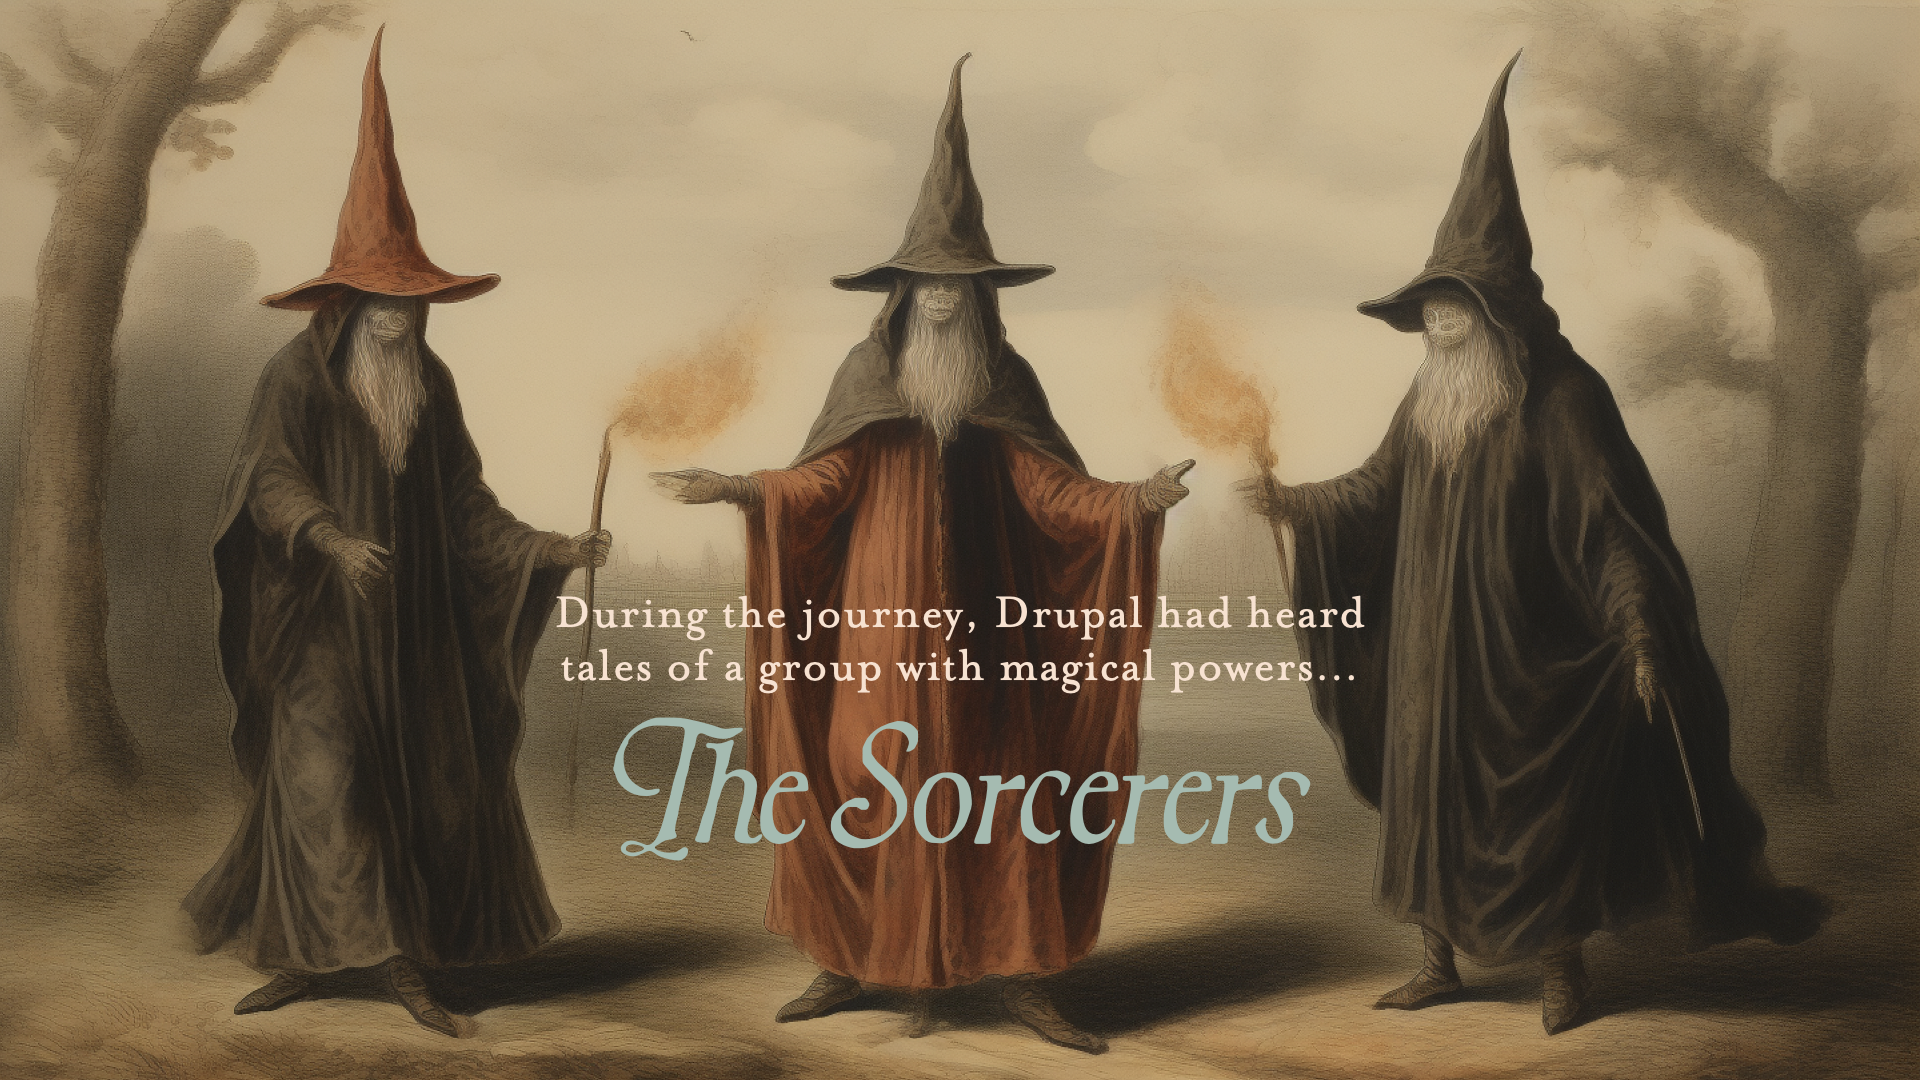 Three wise sorcerers in robes and pointy hats, symbolizing members of the Drupal Marketing Committee.